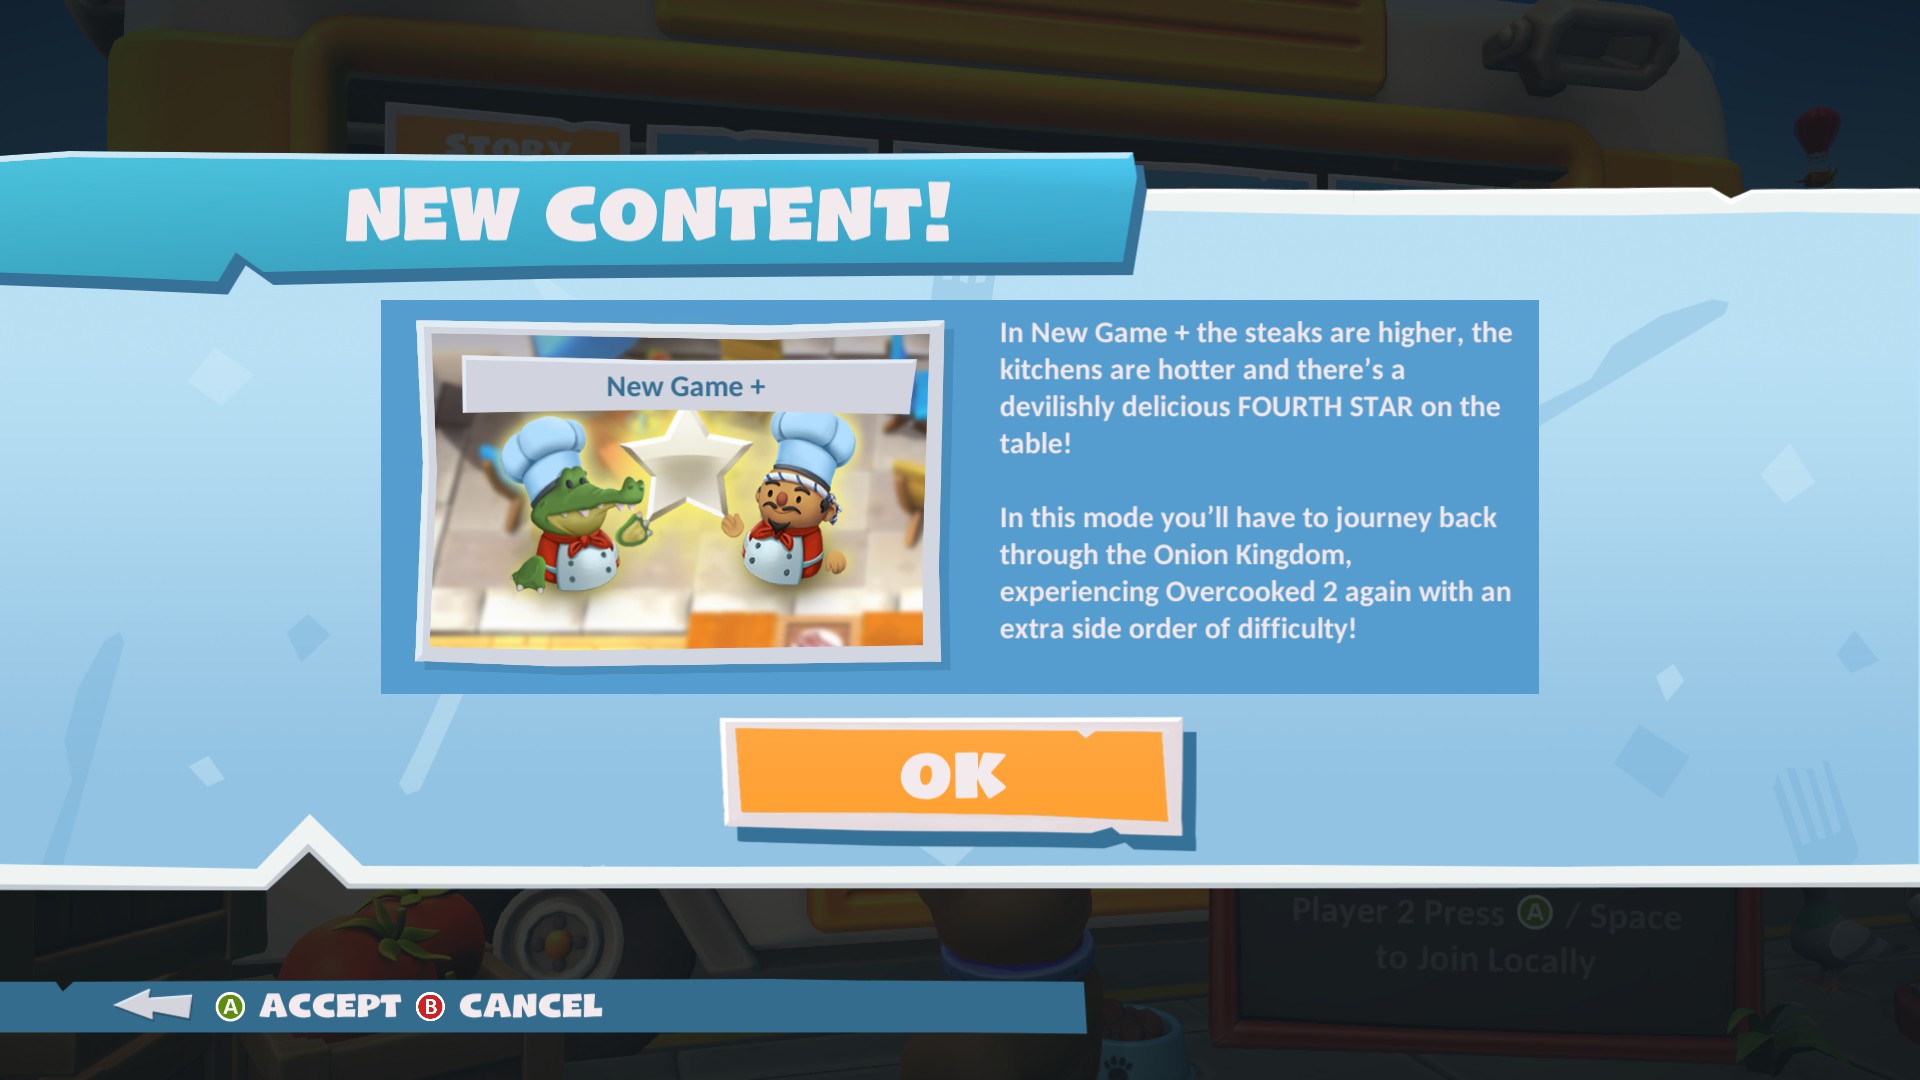 overcooked 2 free download all dlcs